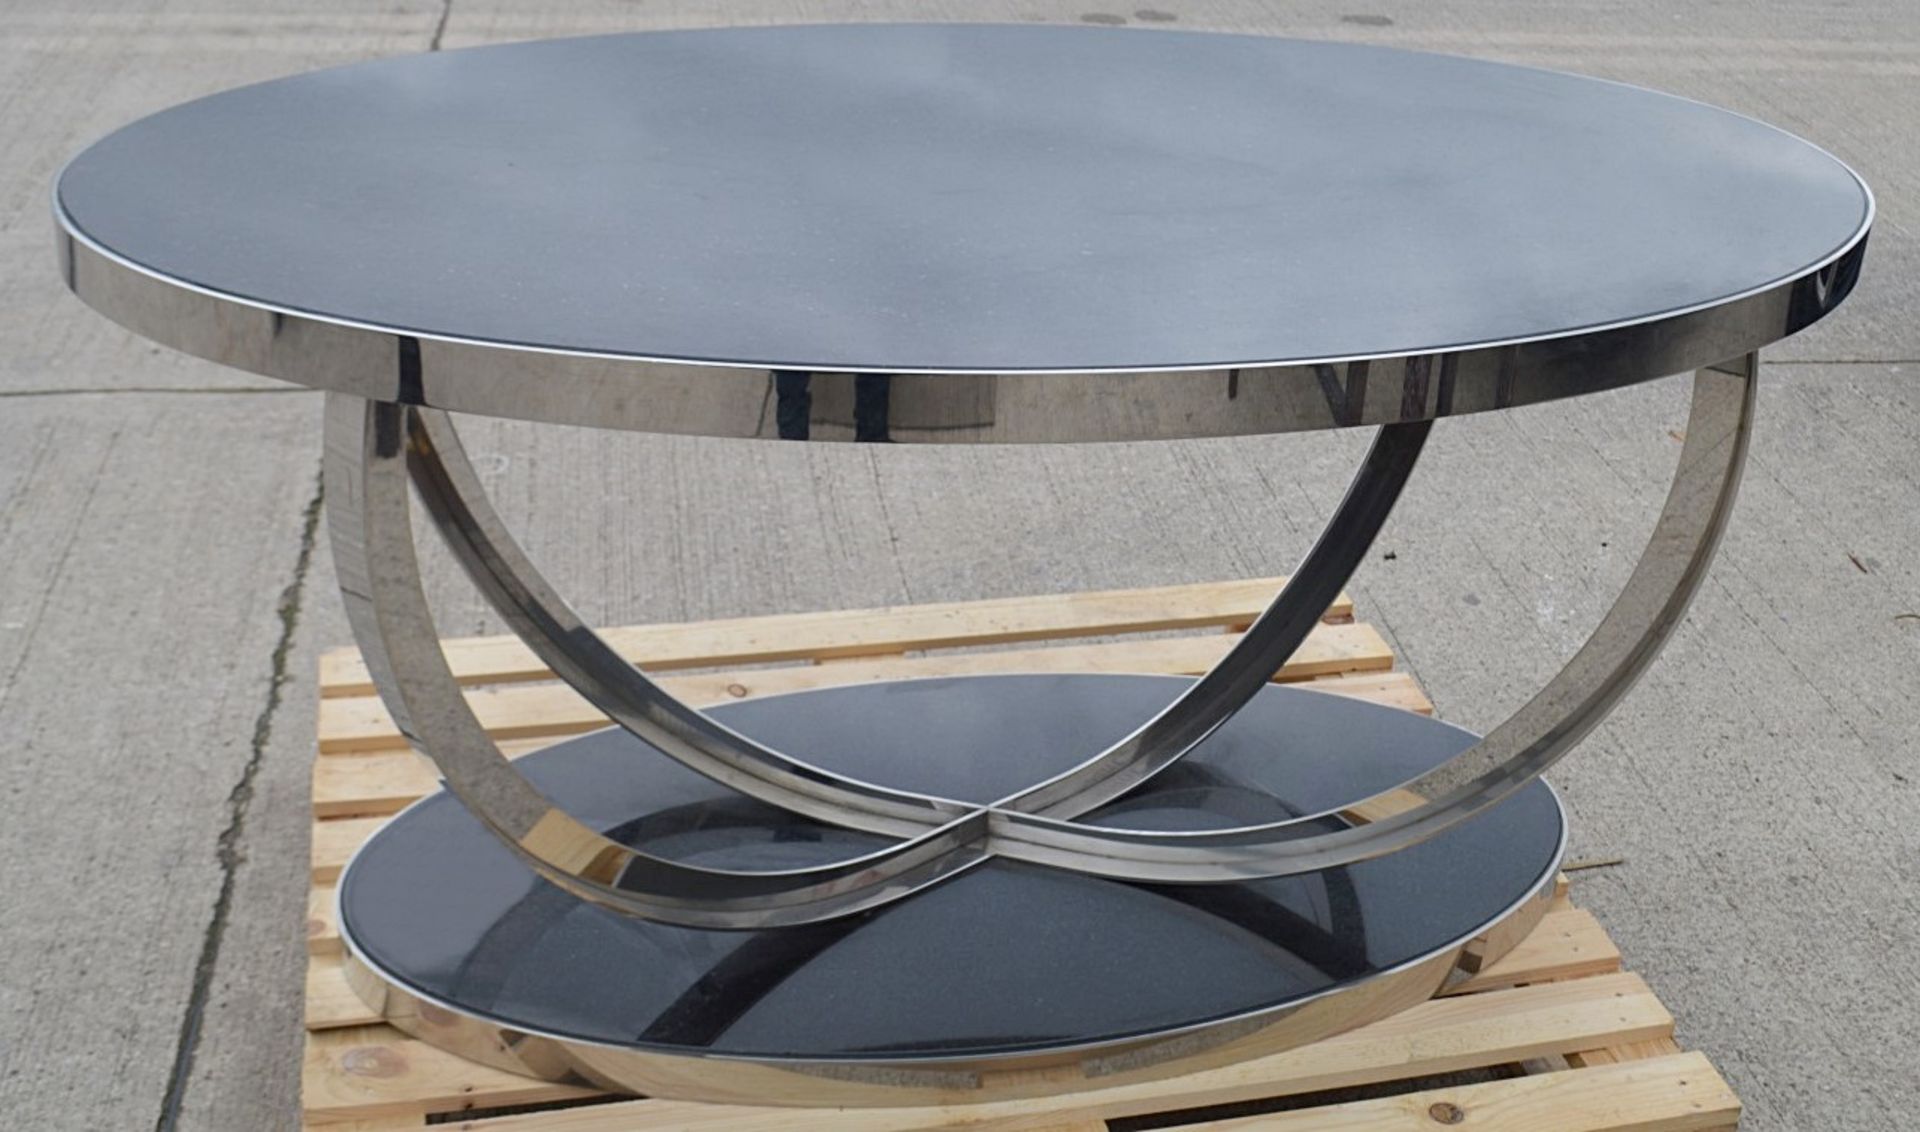 1 x Stunning 1.5 Metre Metal Oval Table With A Granite Style Surface And Sculptural Cross Base